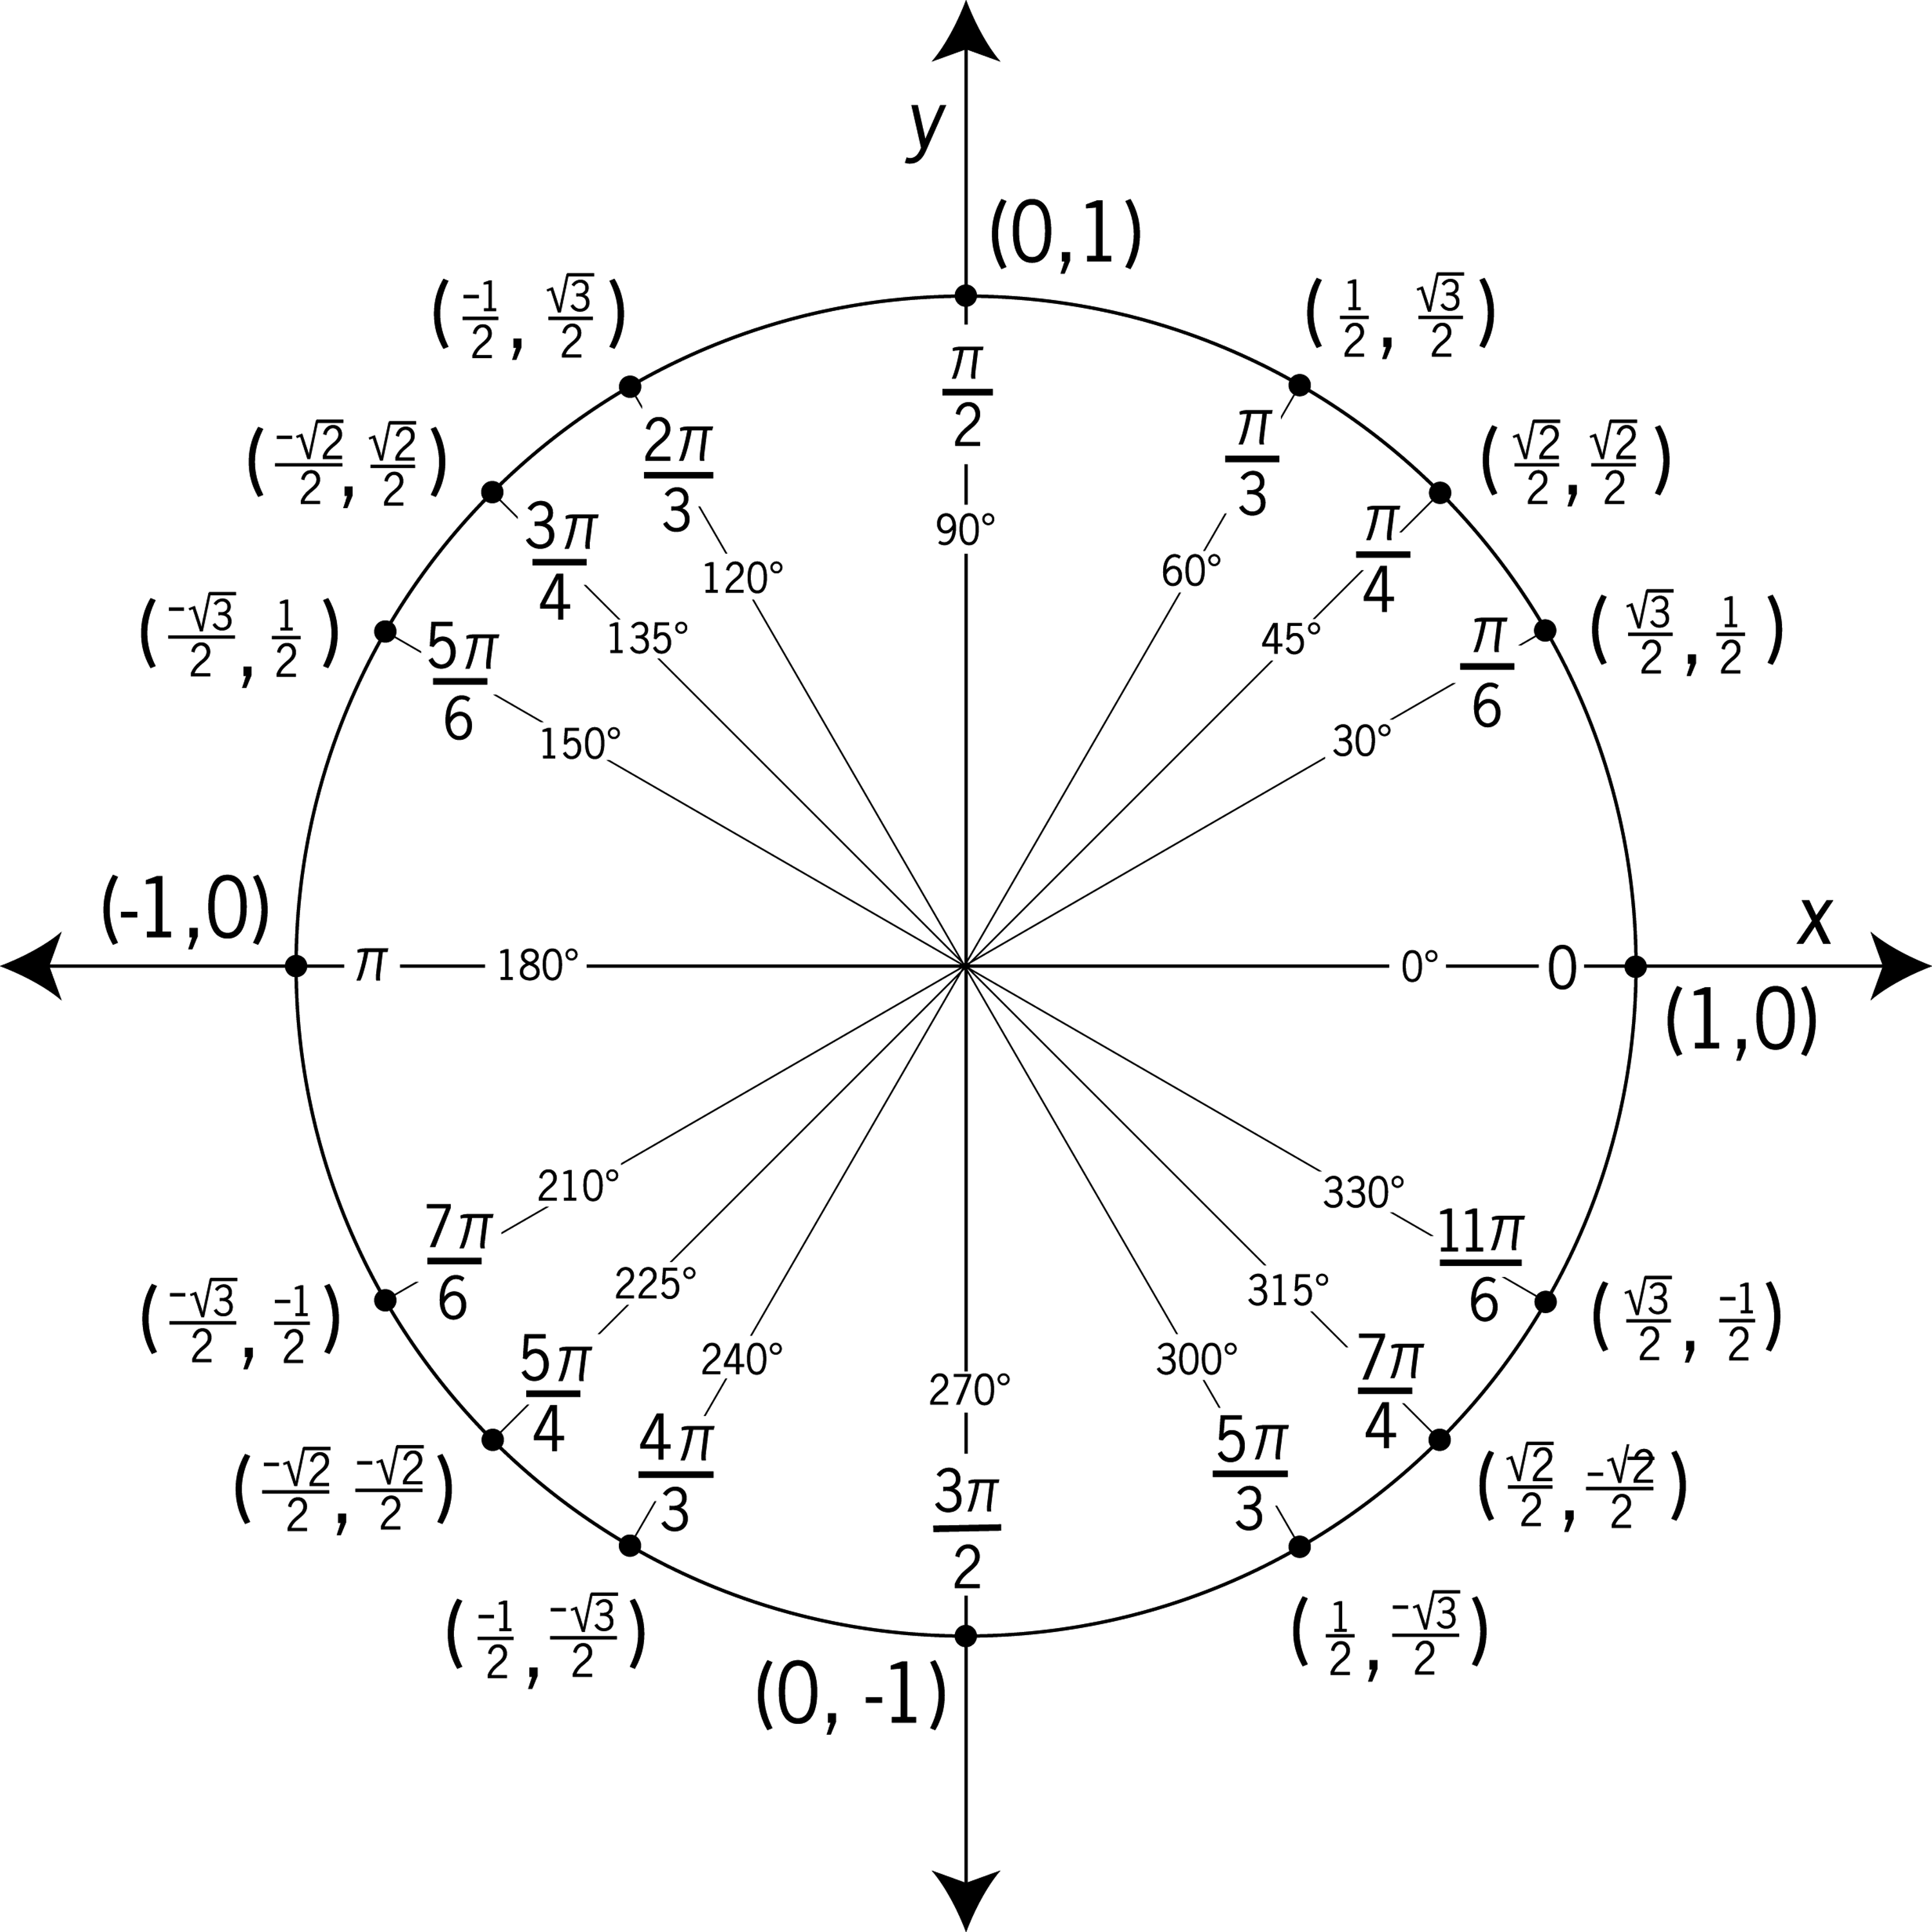 Unit Circle Labeled With Special Angles And Values | ClipArt ETC